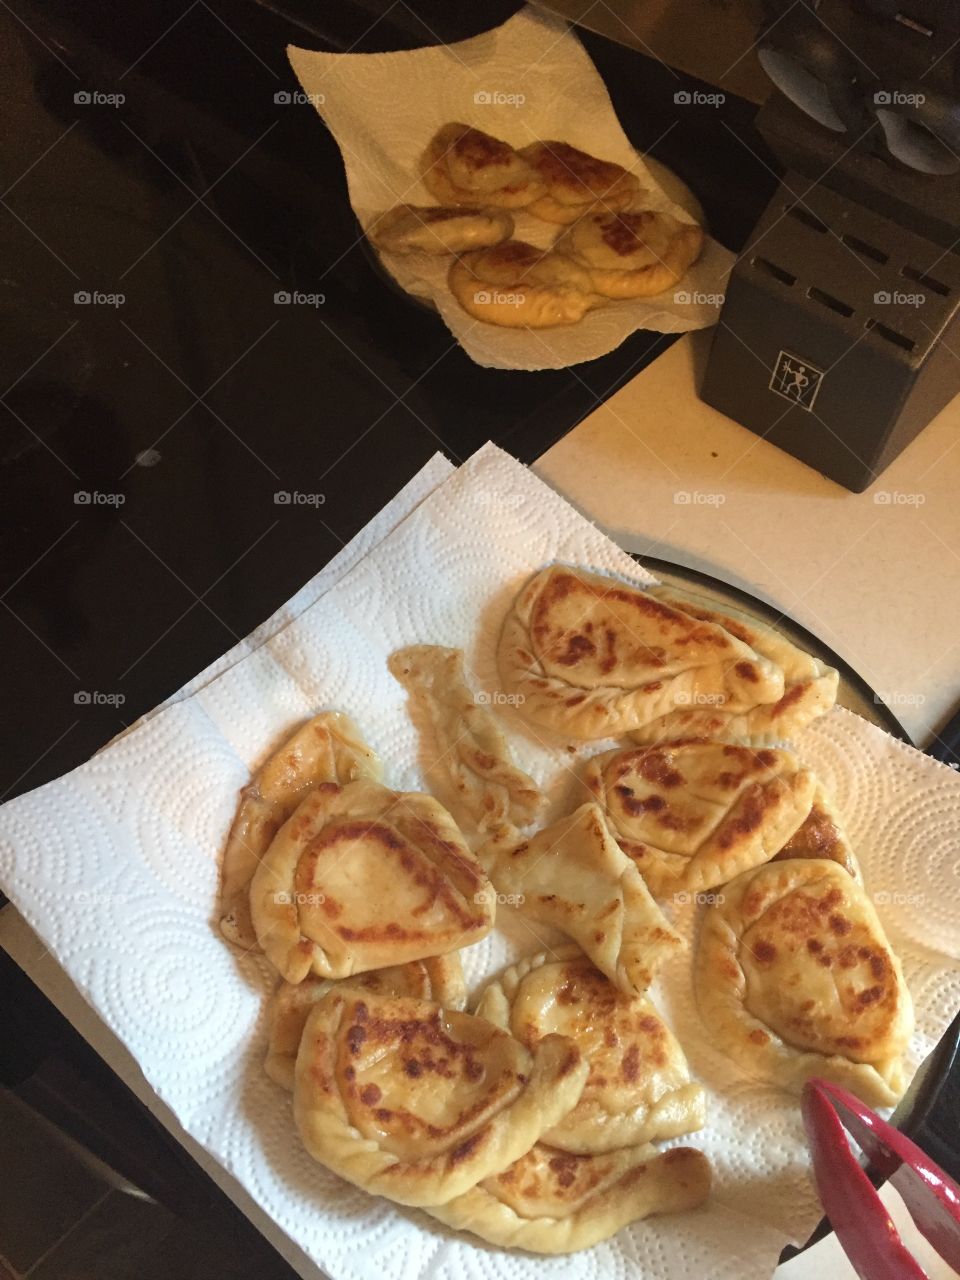 Homemade pierogies made by my Polish mother...delicious. 